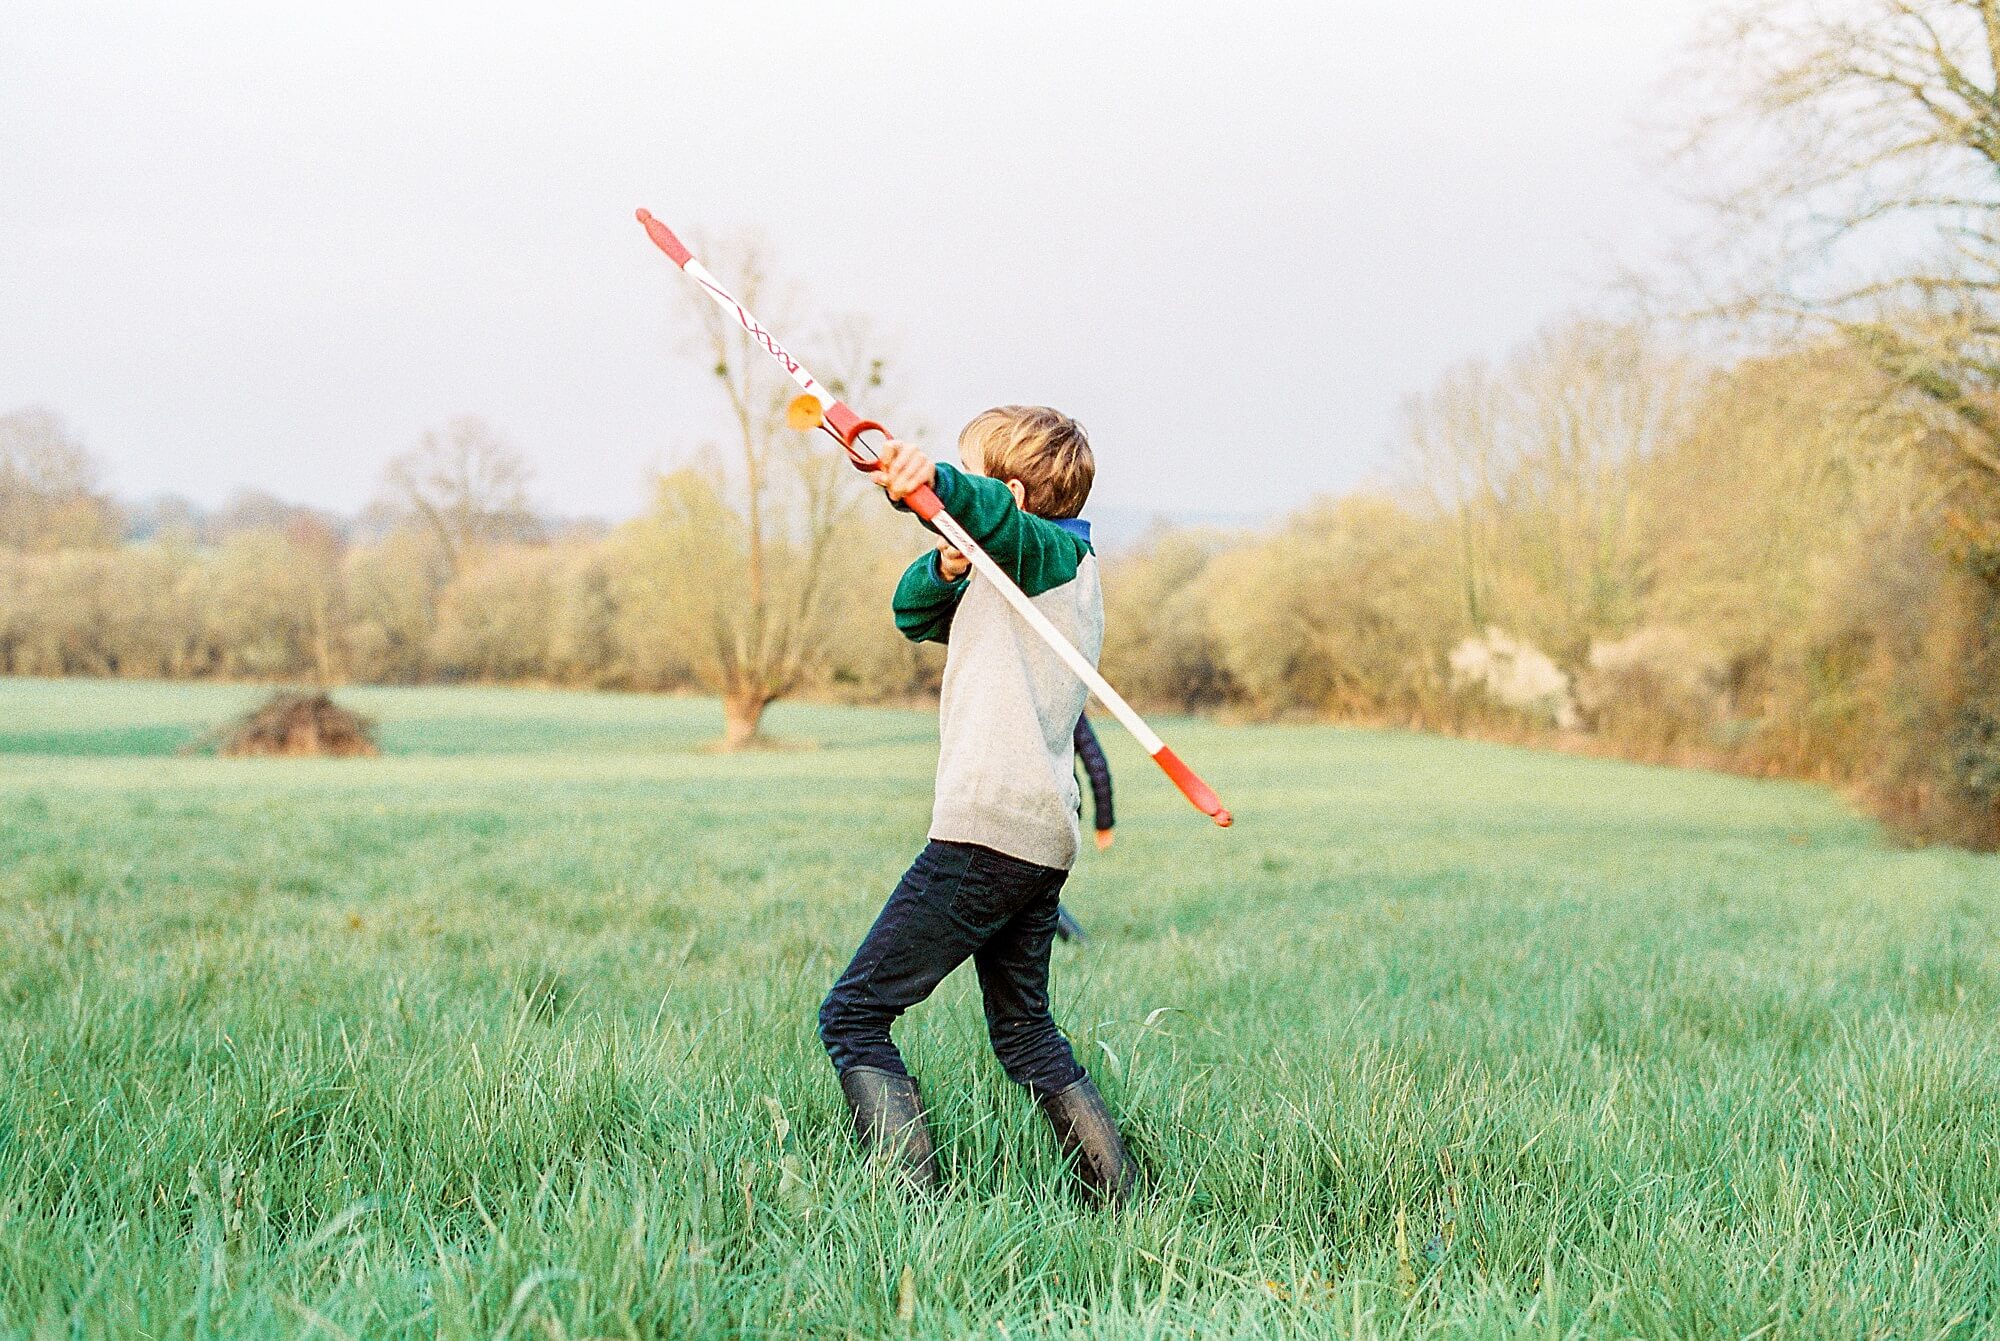 A young boy plays with a rubber bow and arrow set in a large grassy field at sunset. 